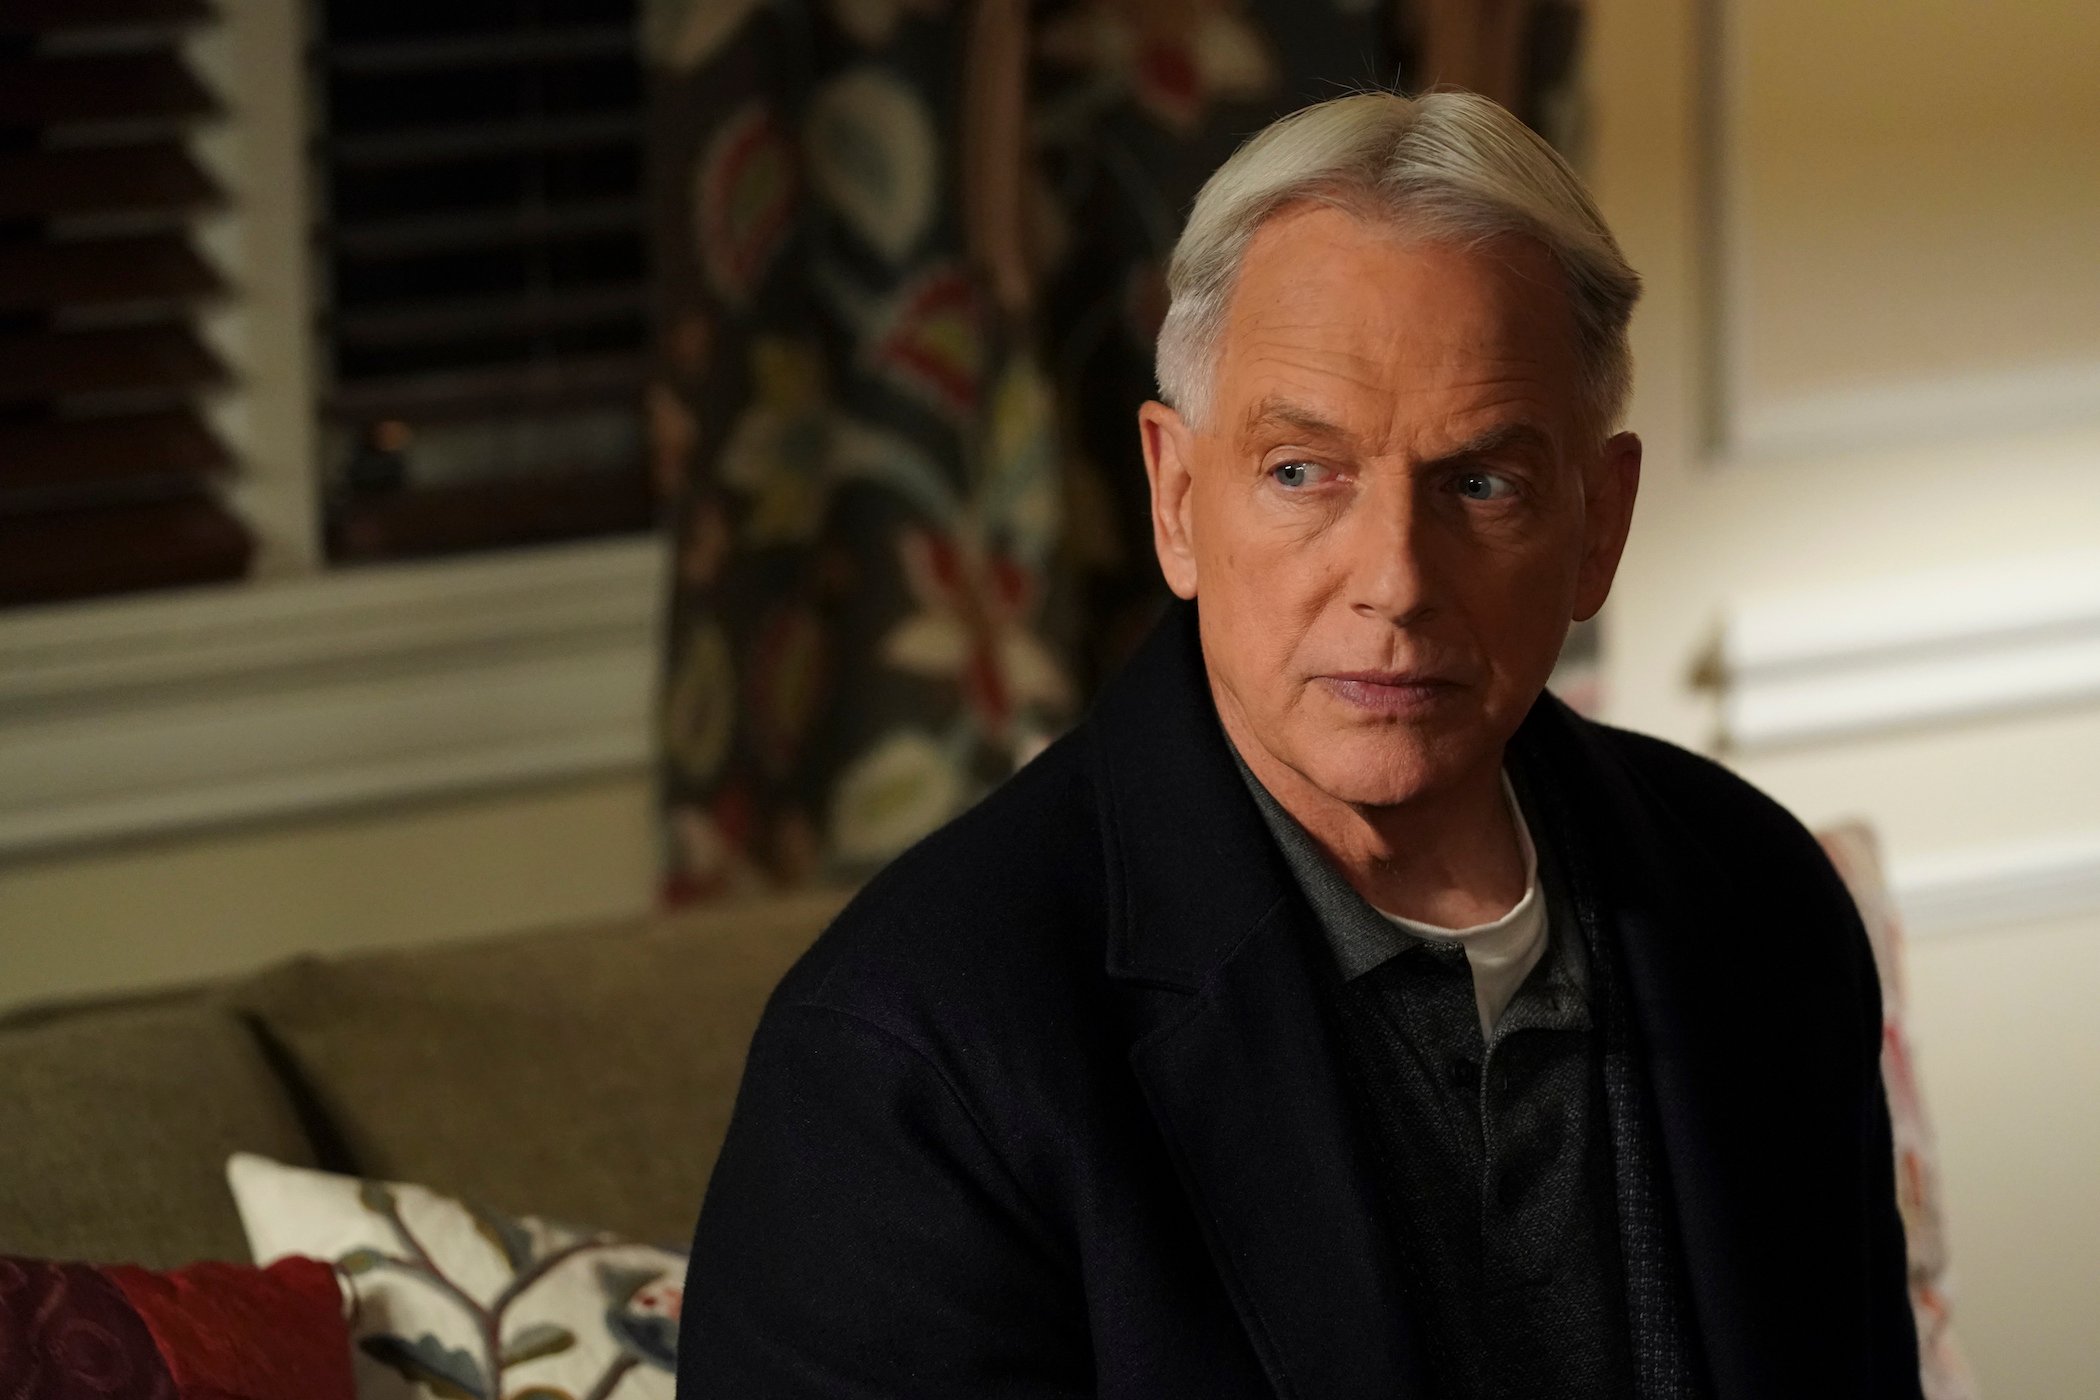 Leroy Jethro Gibbs, played by Mark Harmon, in 'NCIS' Season 19. Mark Harmon leaves 'NCIS' in season 19